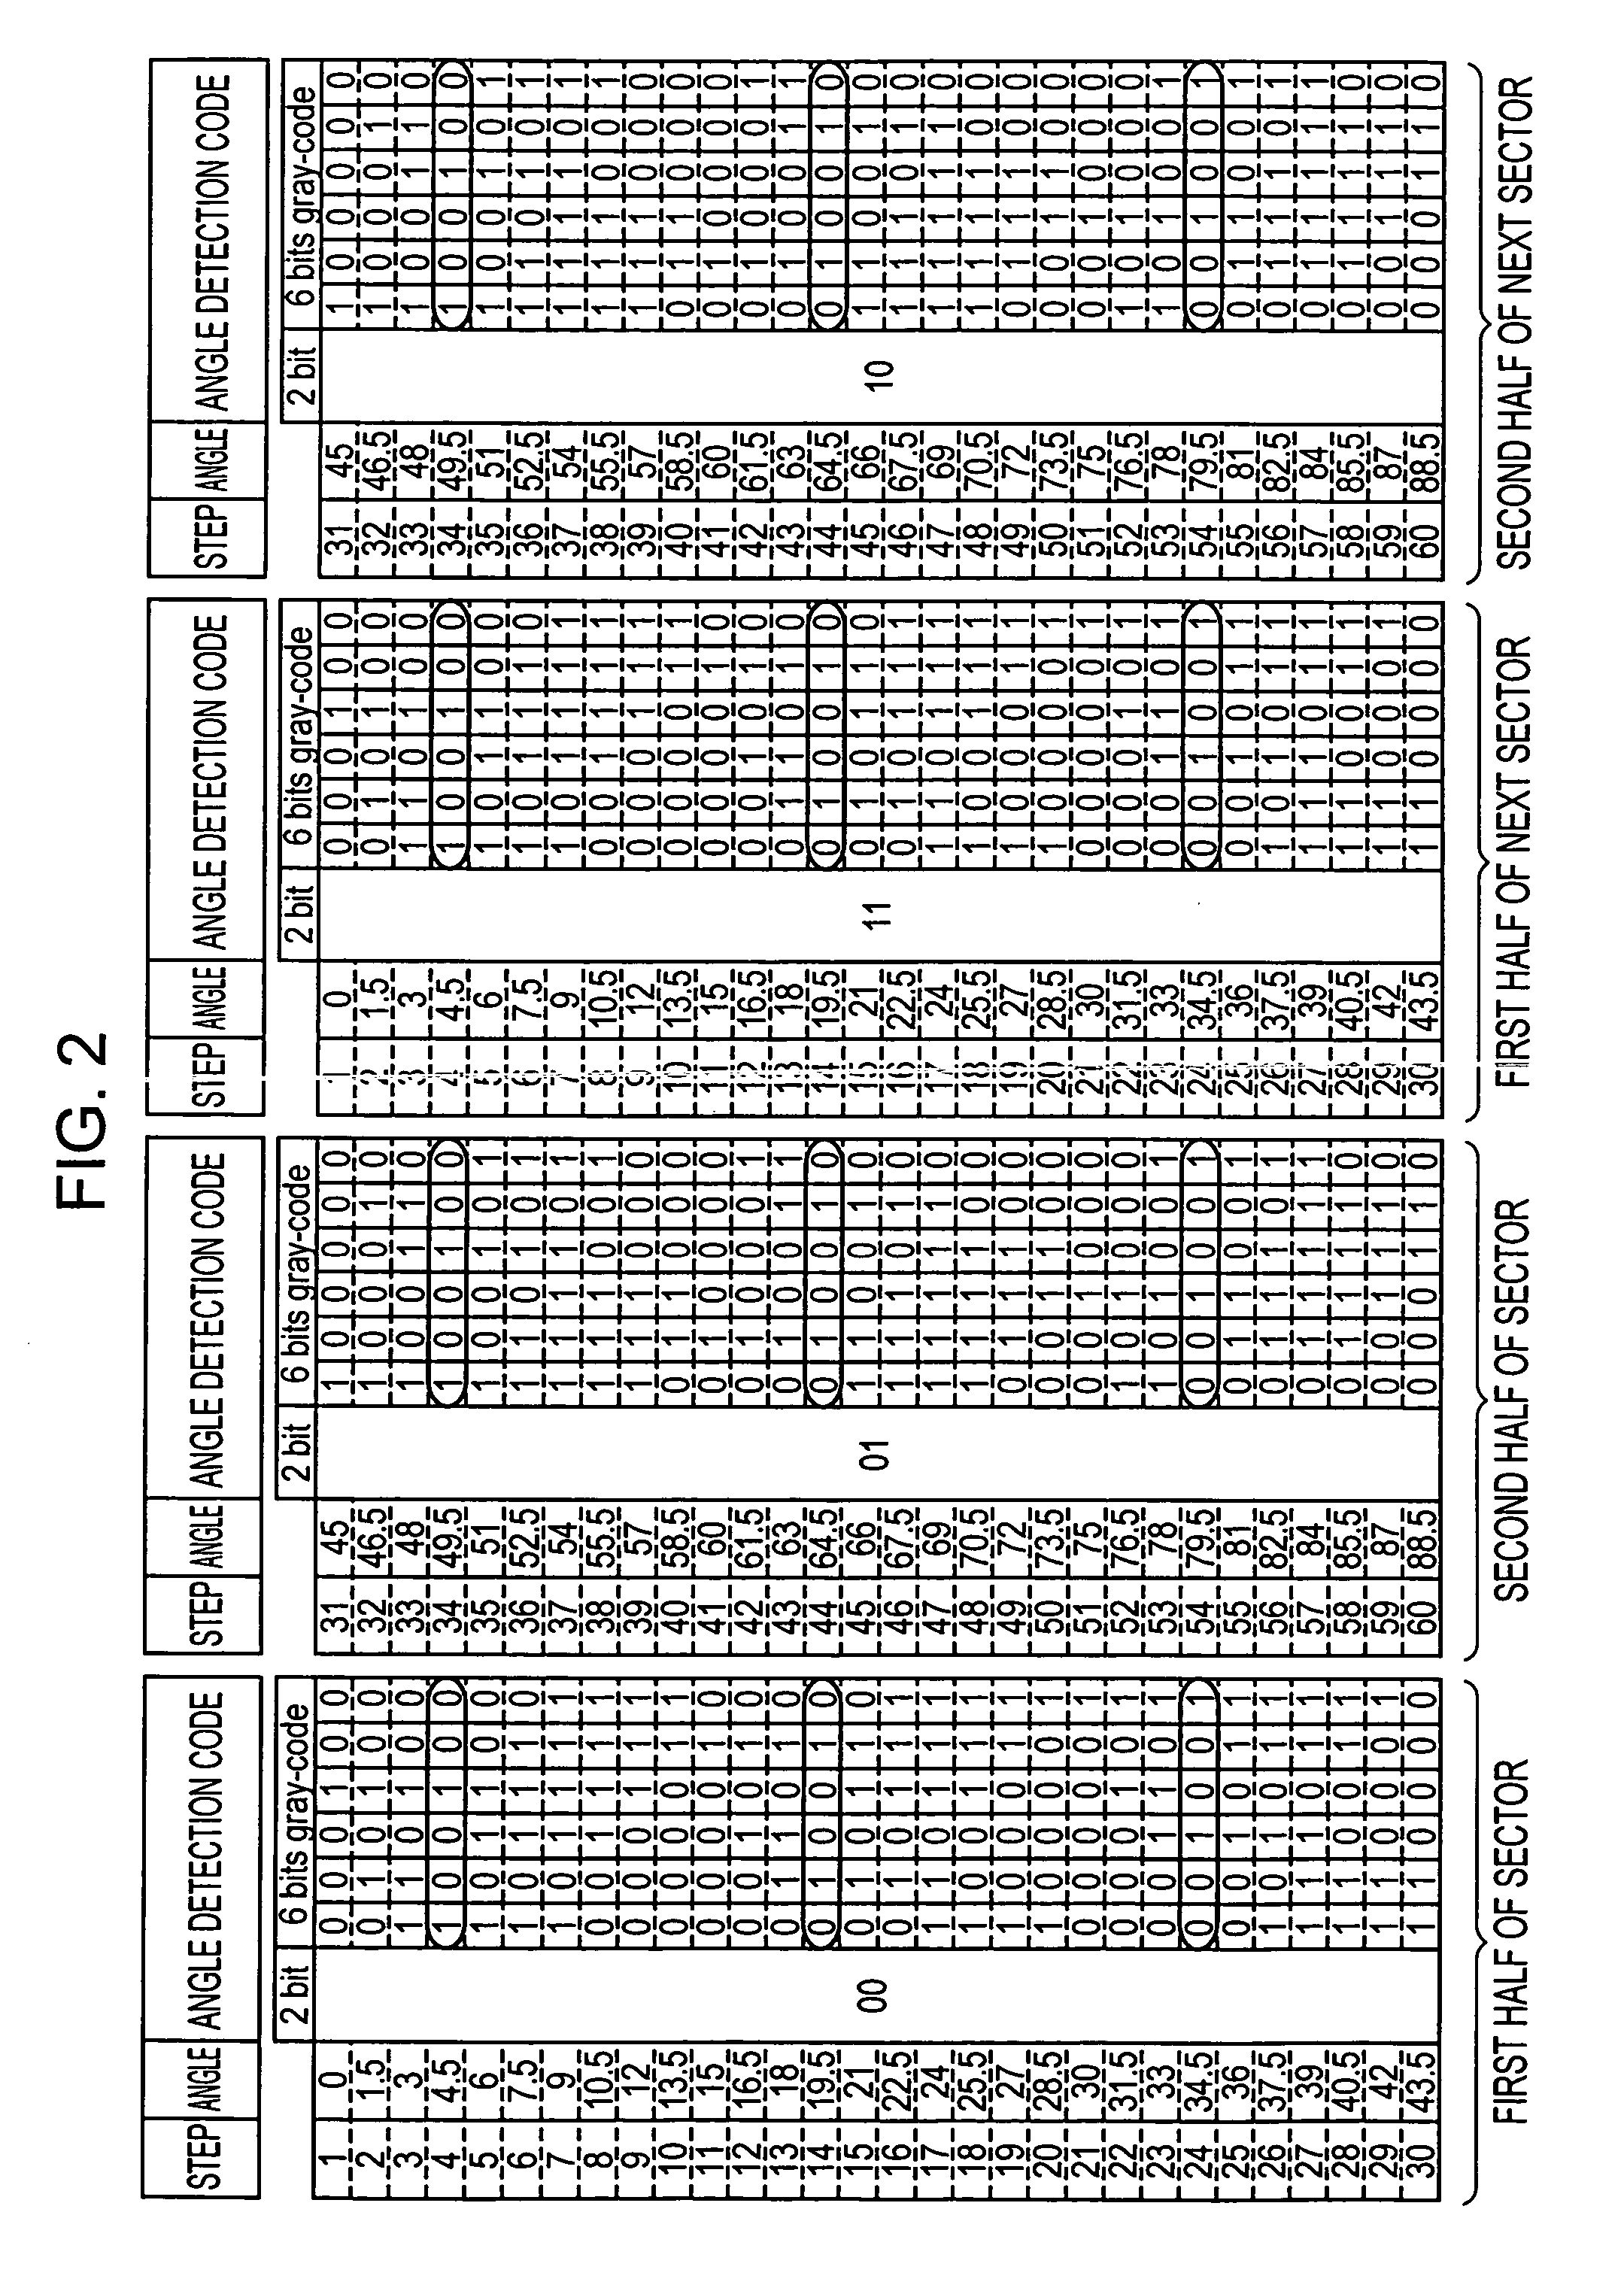 Absolute angle detection apparatus